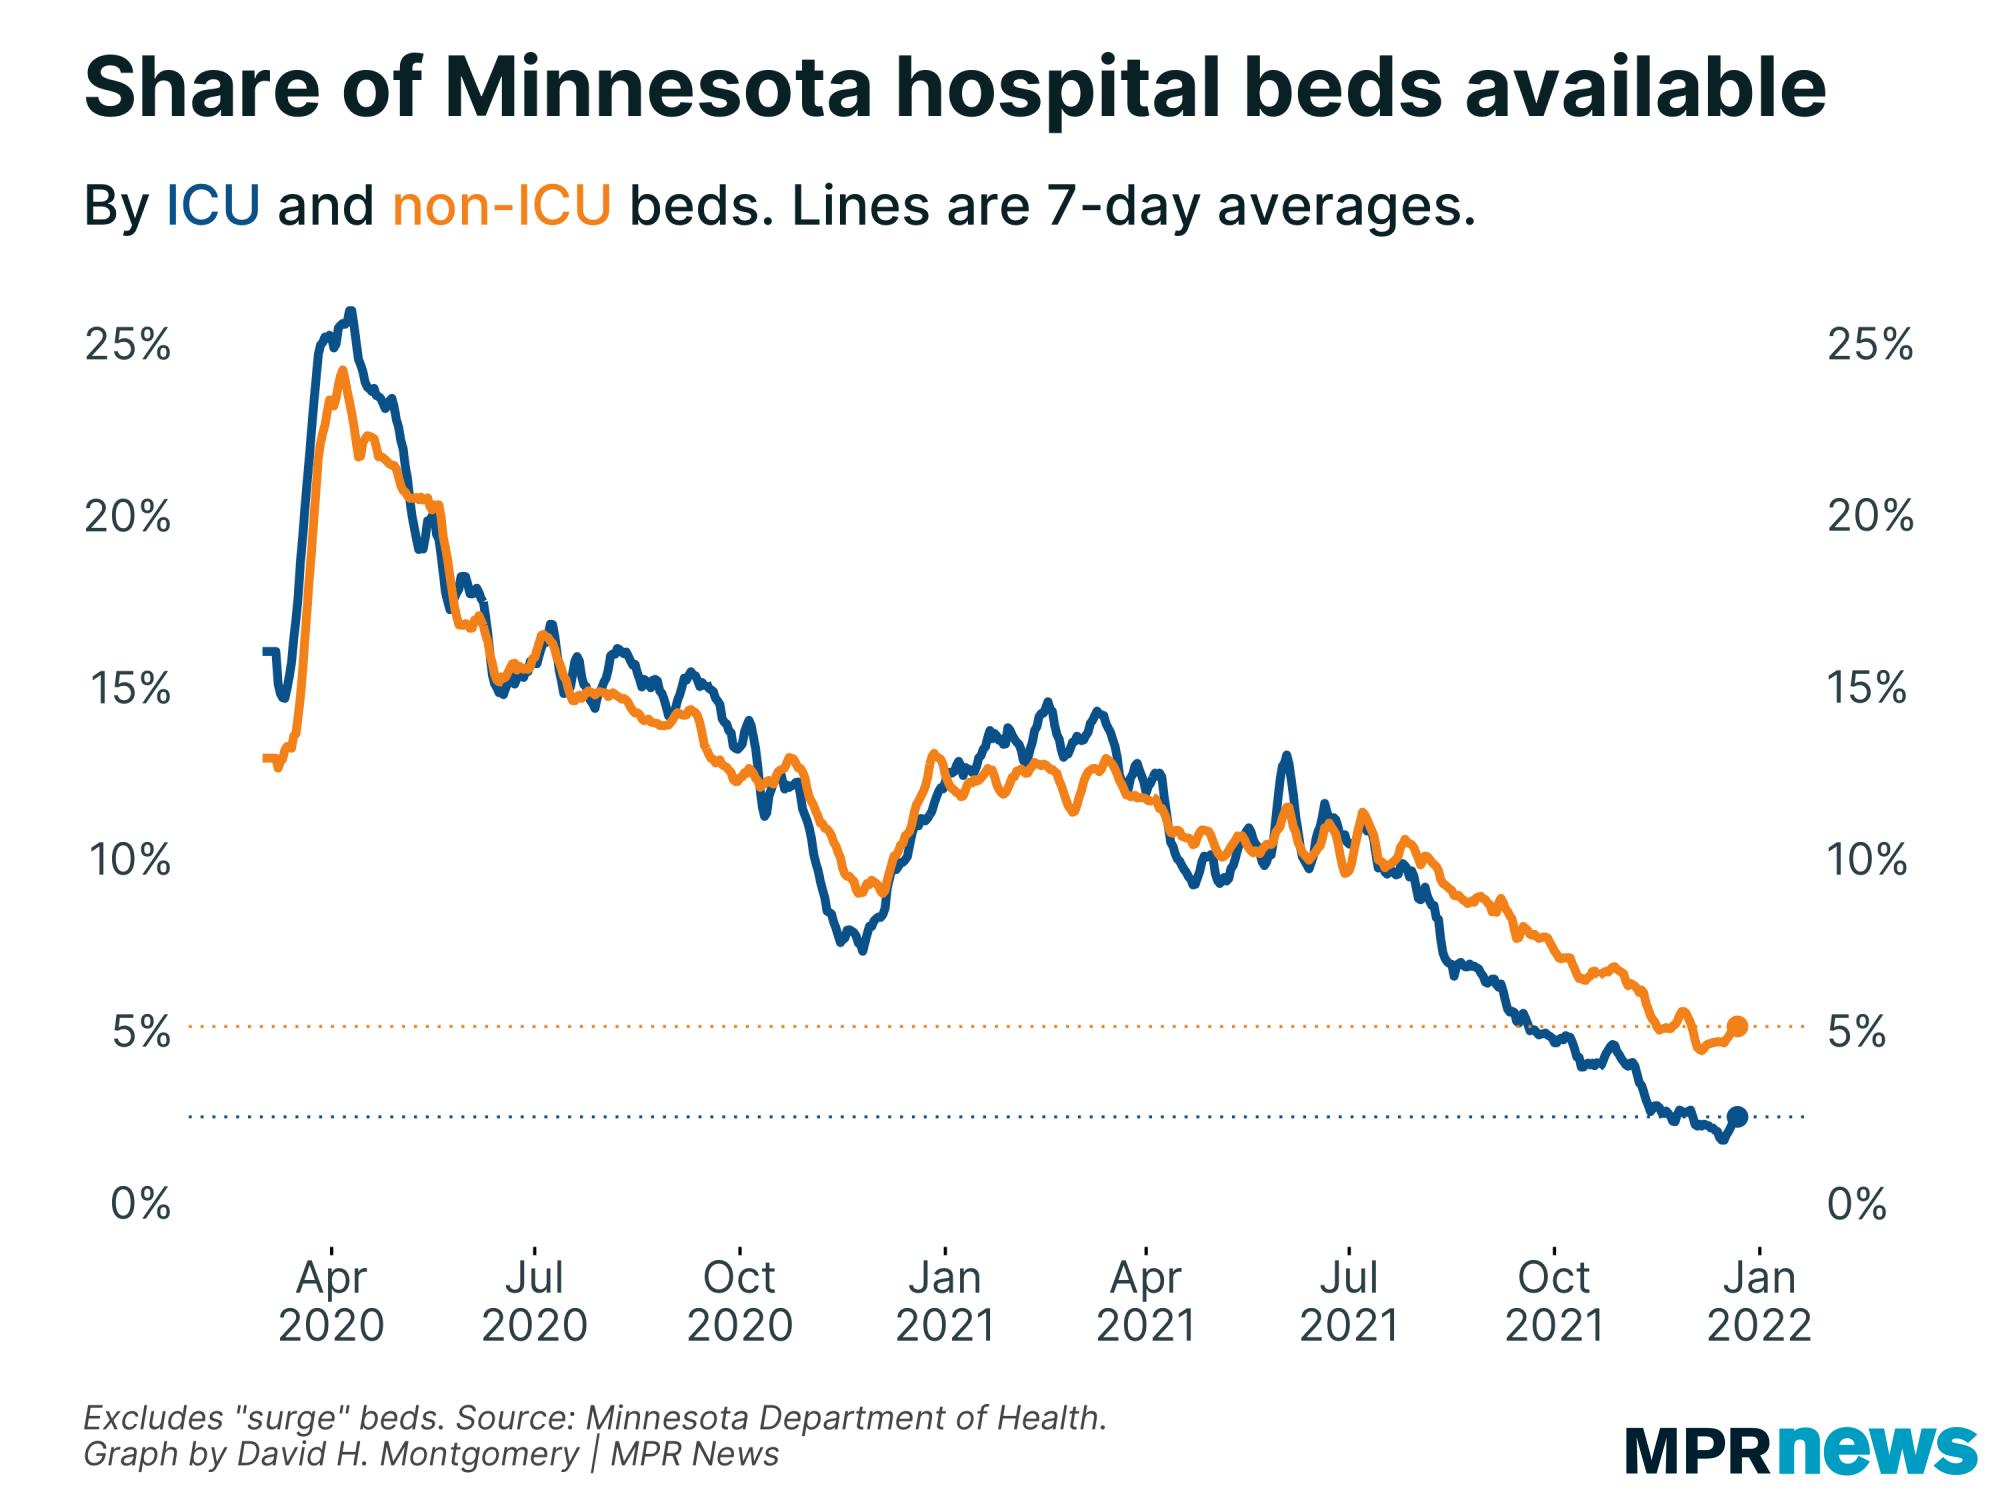 Graph of the share of Minnesota hospital beds available